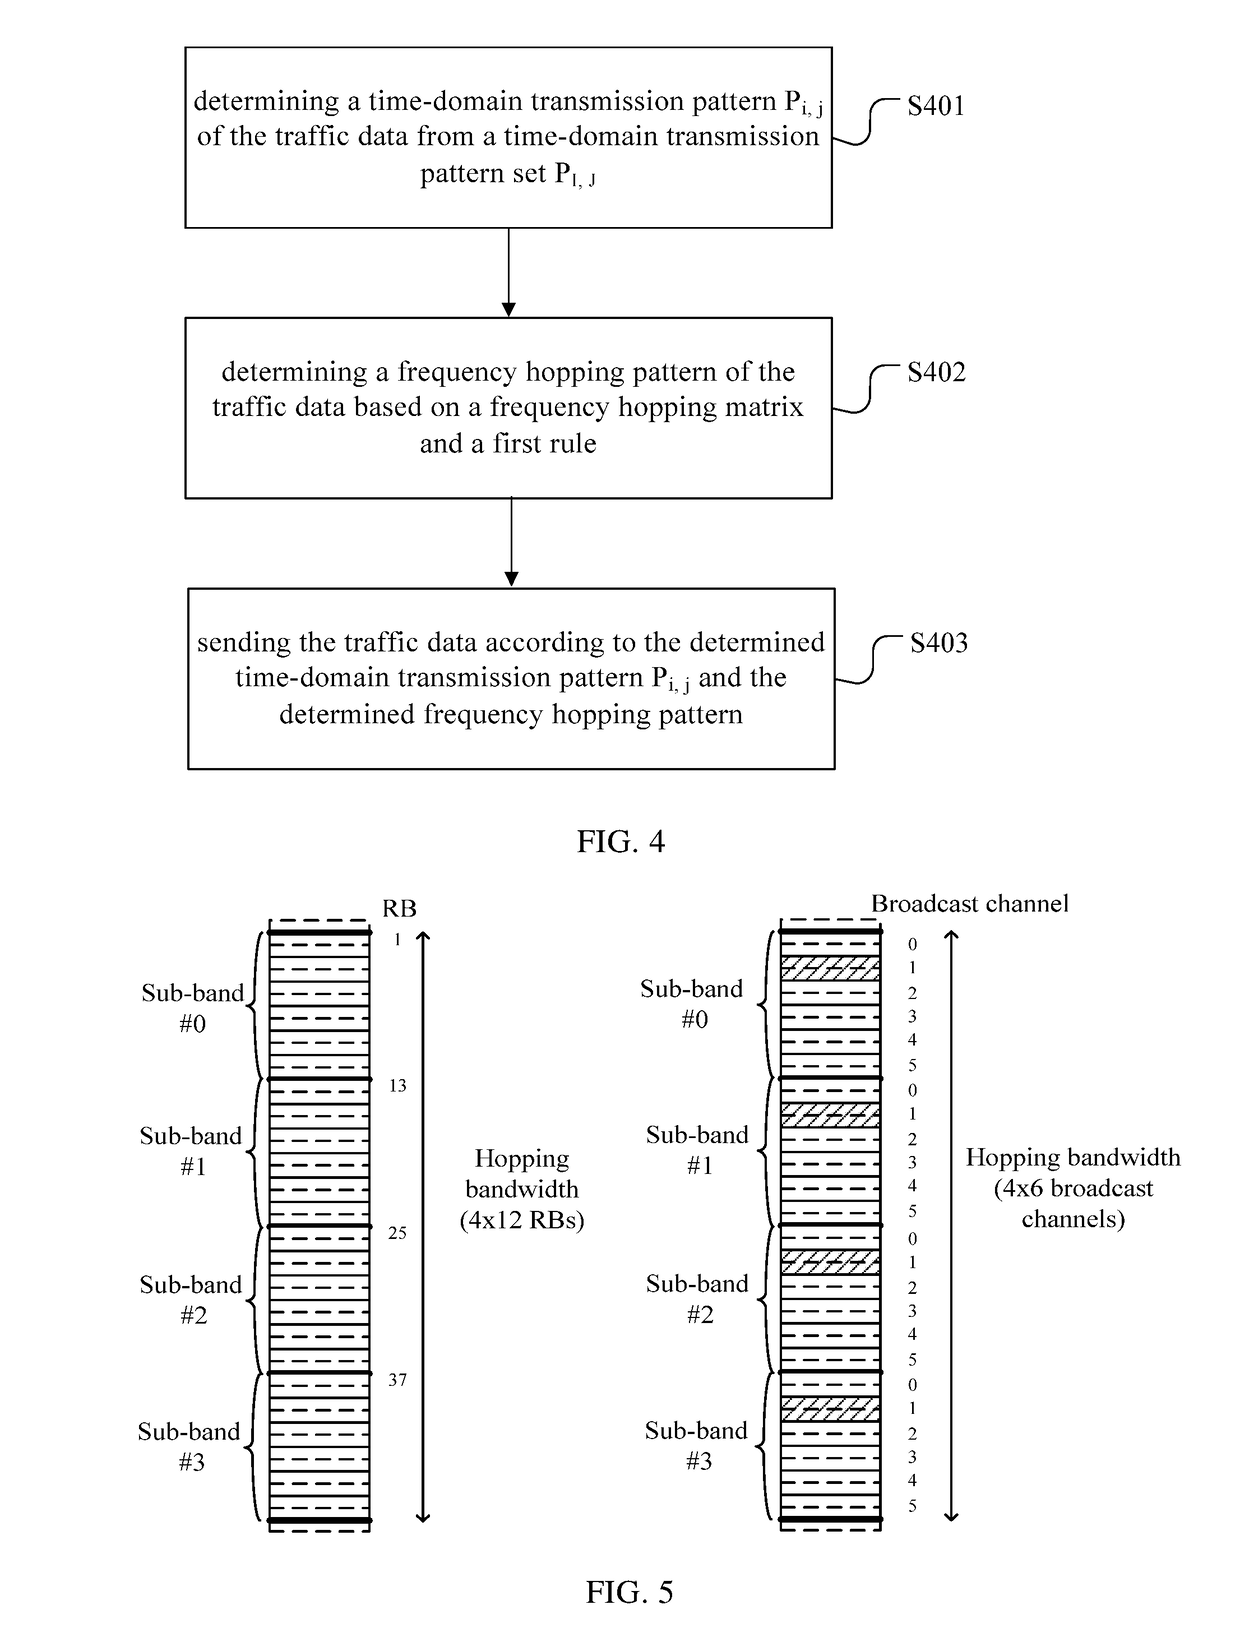 Method and apparatus for determining transmission time-frequency resources of traffic data